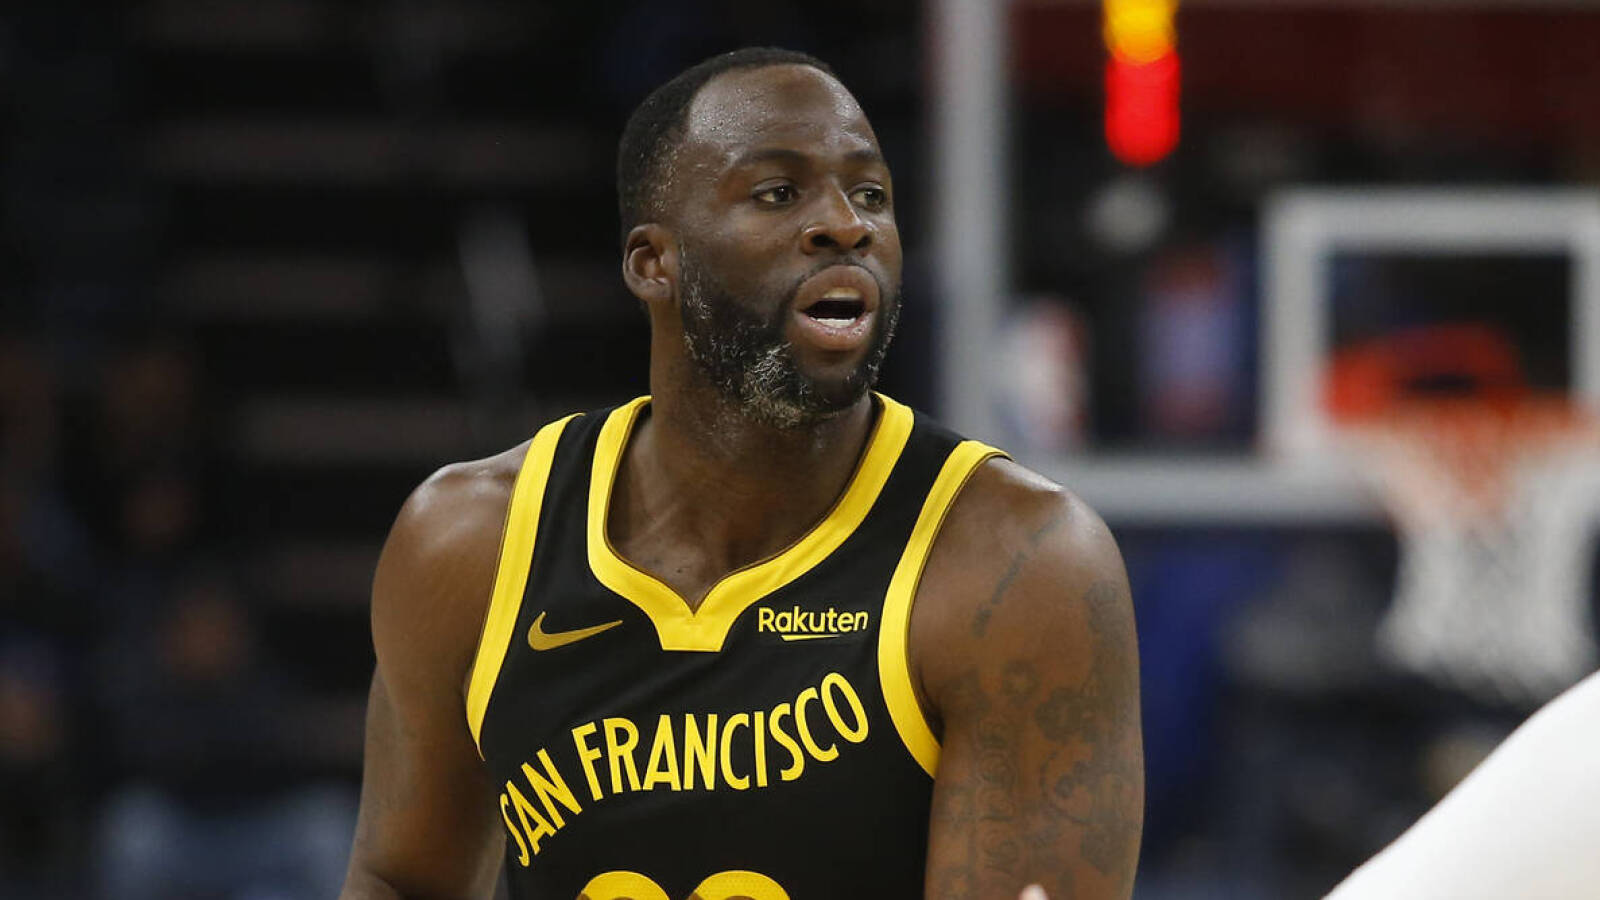 'Just no pride': Draymond Green weighs in on Warriors woes